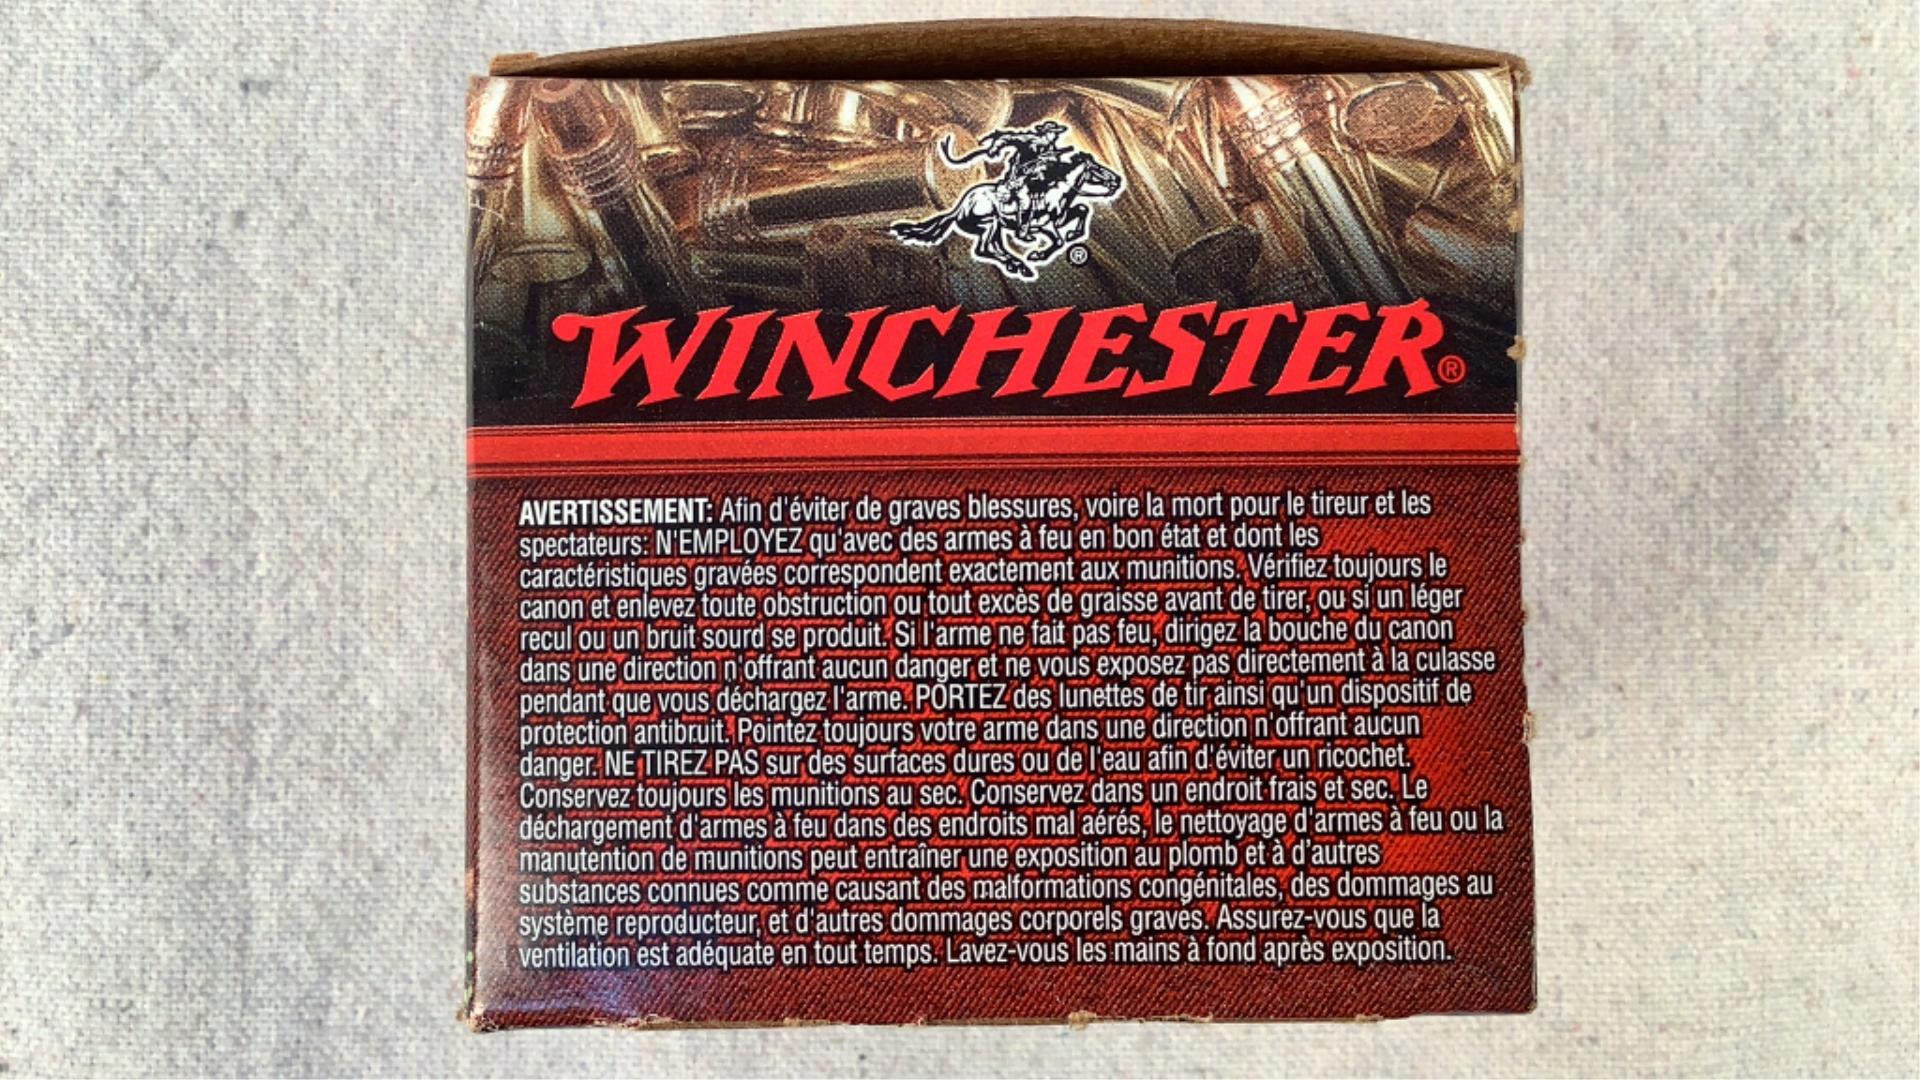 (333) Winchester 22 Long Rifle